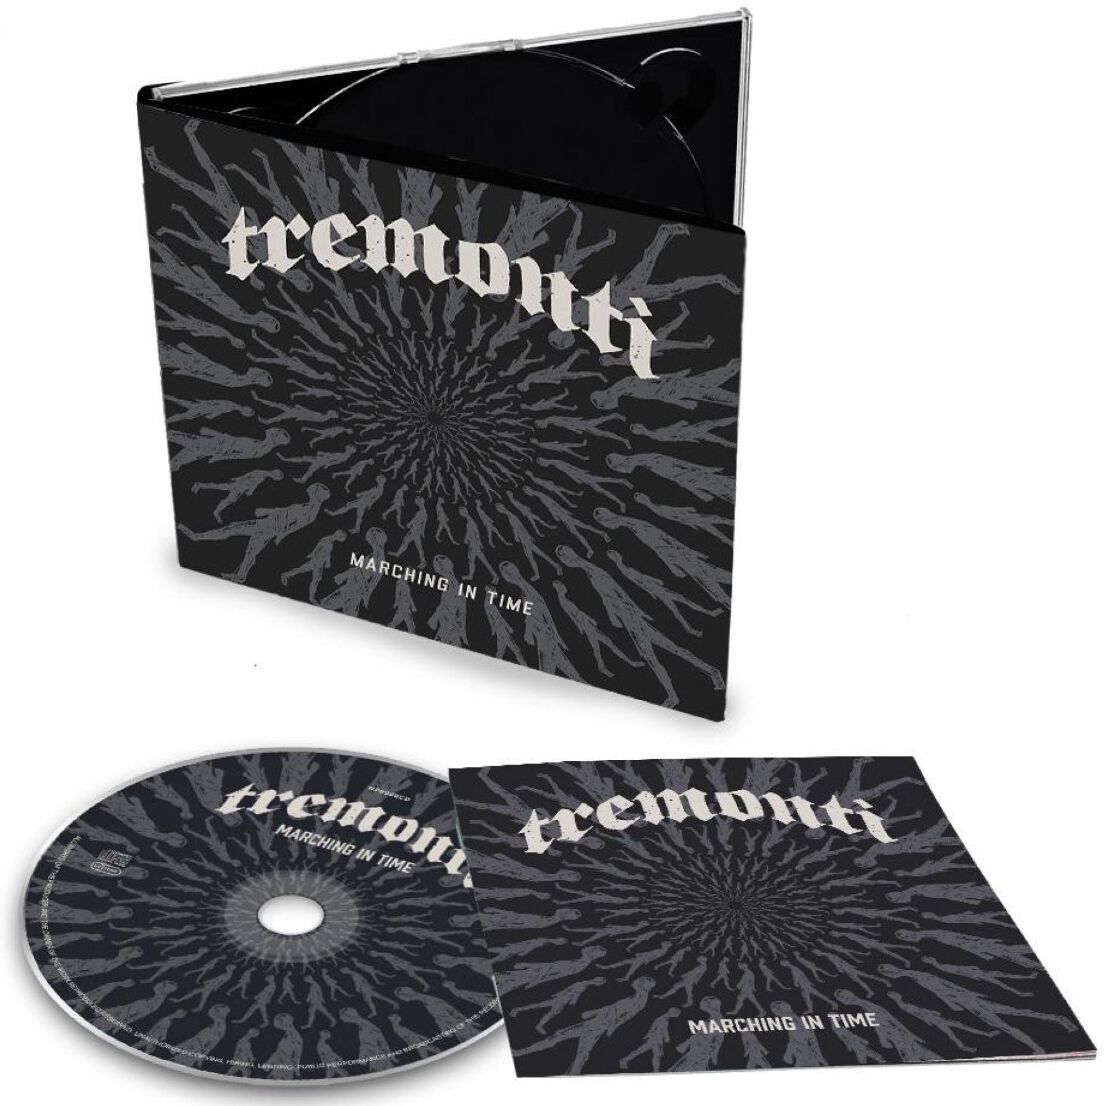 Image of Tremonti Marching in time CD Standard